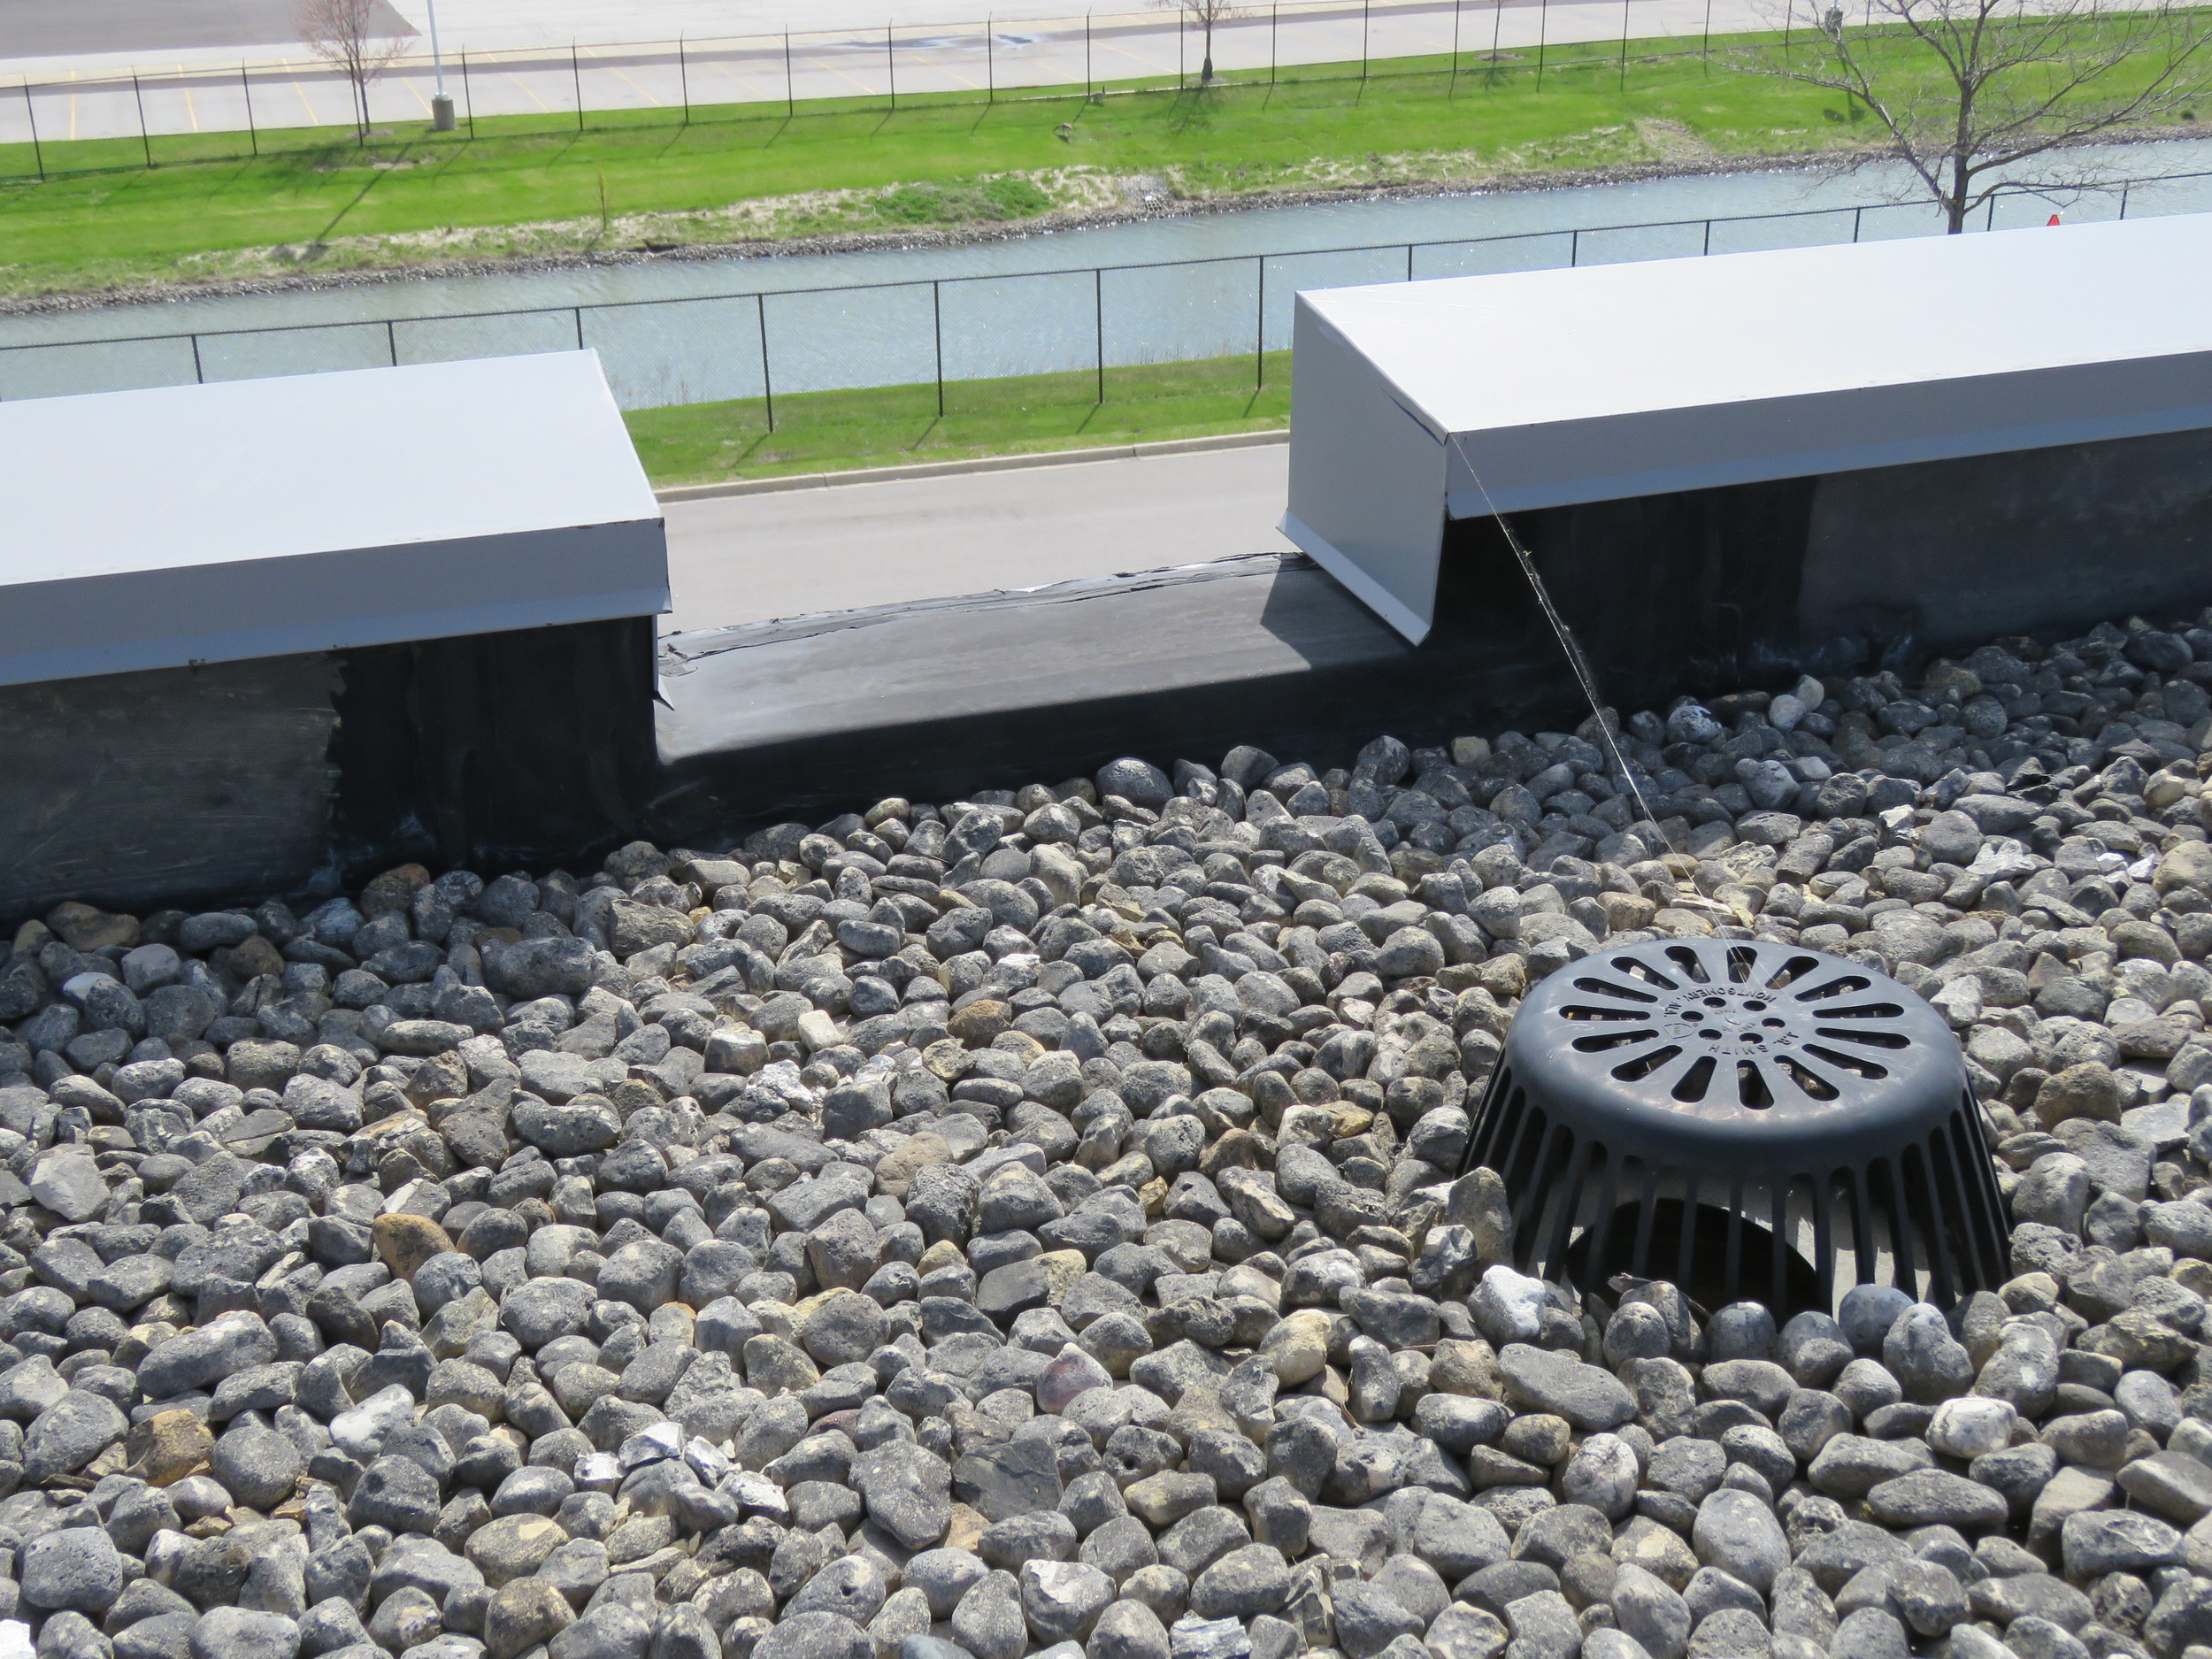 A channel-type overflow scupper on a ballasted EPDM roof